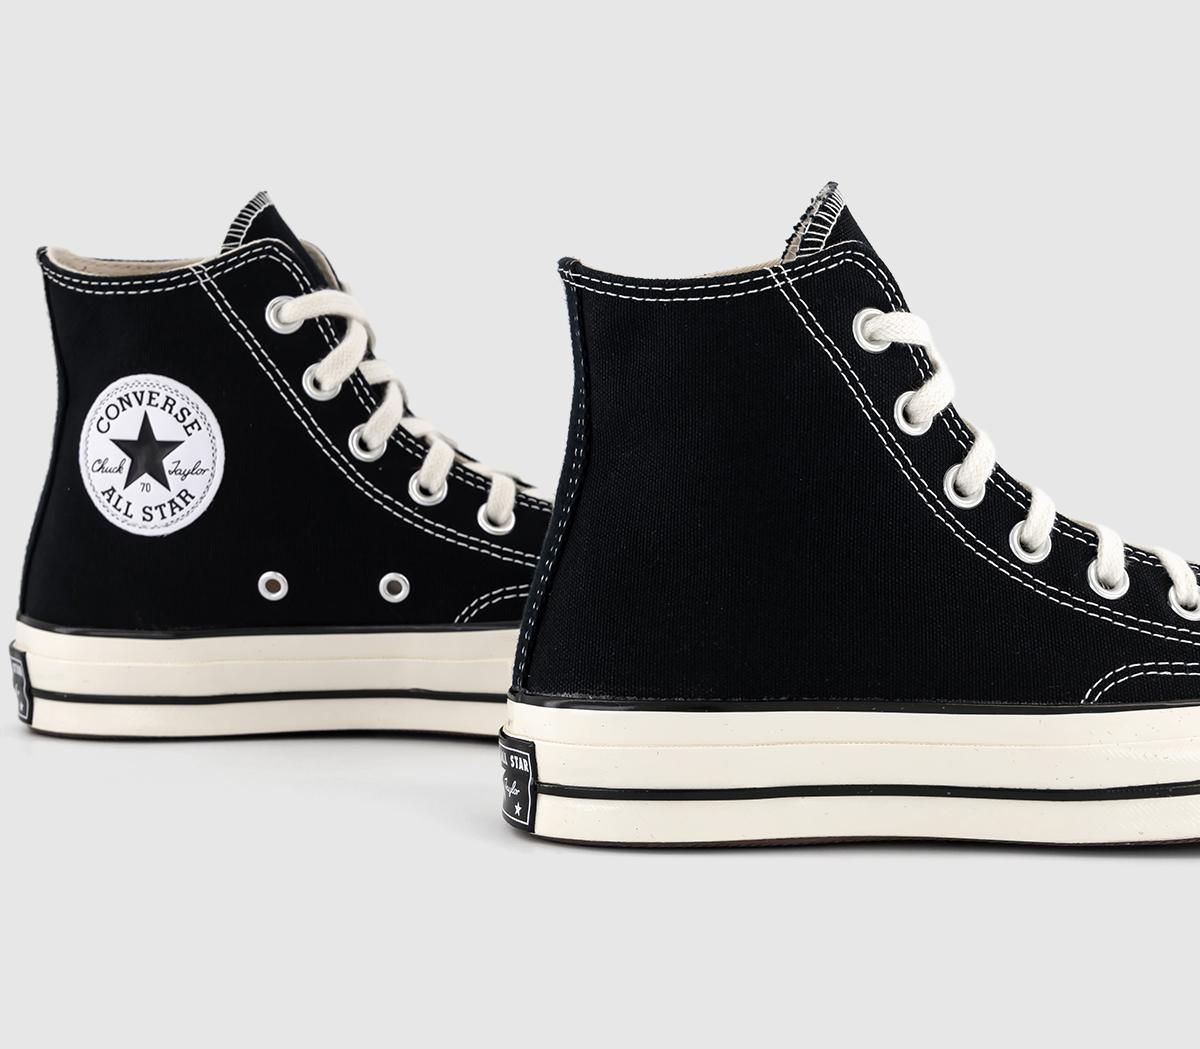 Converse All Star Hi 70's Trainers Black - His trainers | OFFICE London (UK)